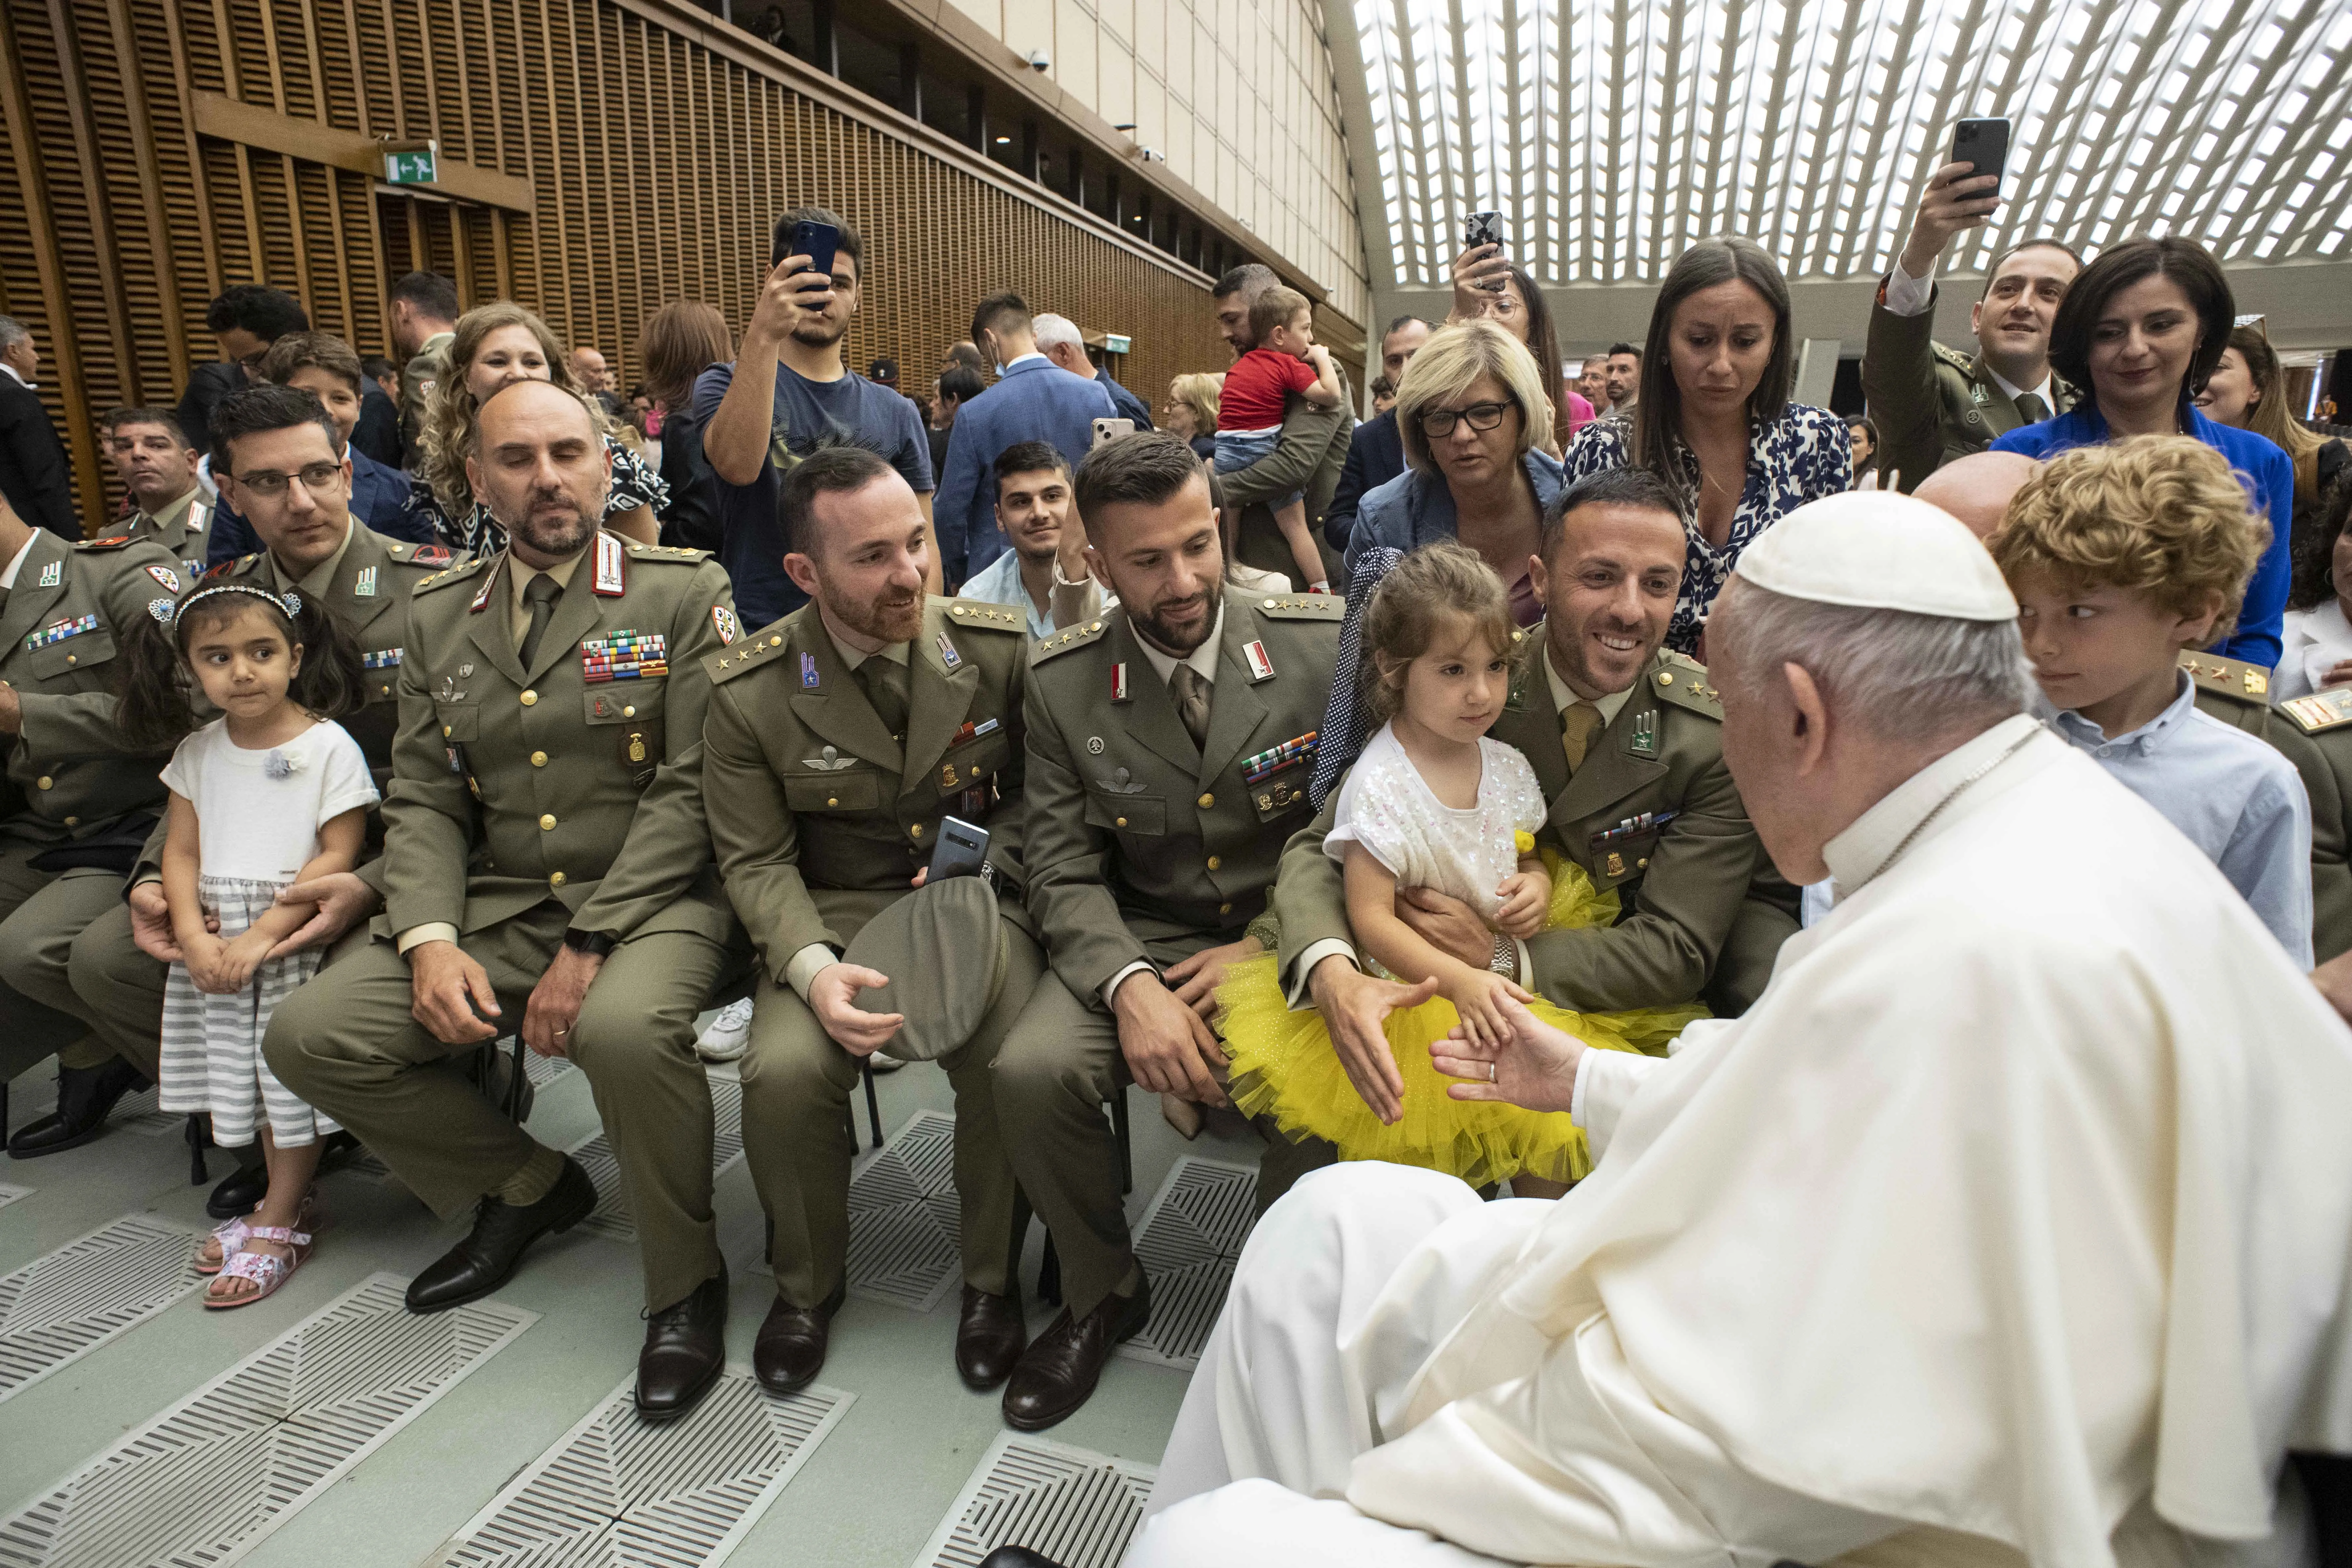 Pope Francis meets the Grenadiers of Sardinia Brigade, part of the Italian army, and their families, on June 11, 2022.?w=200&h=150